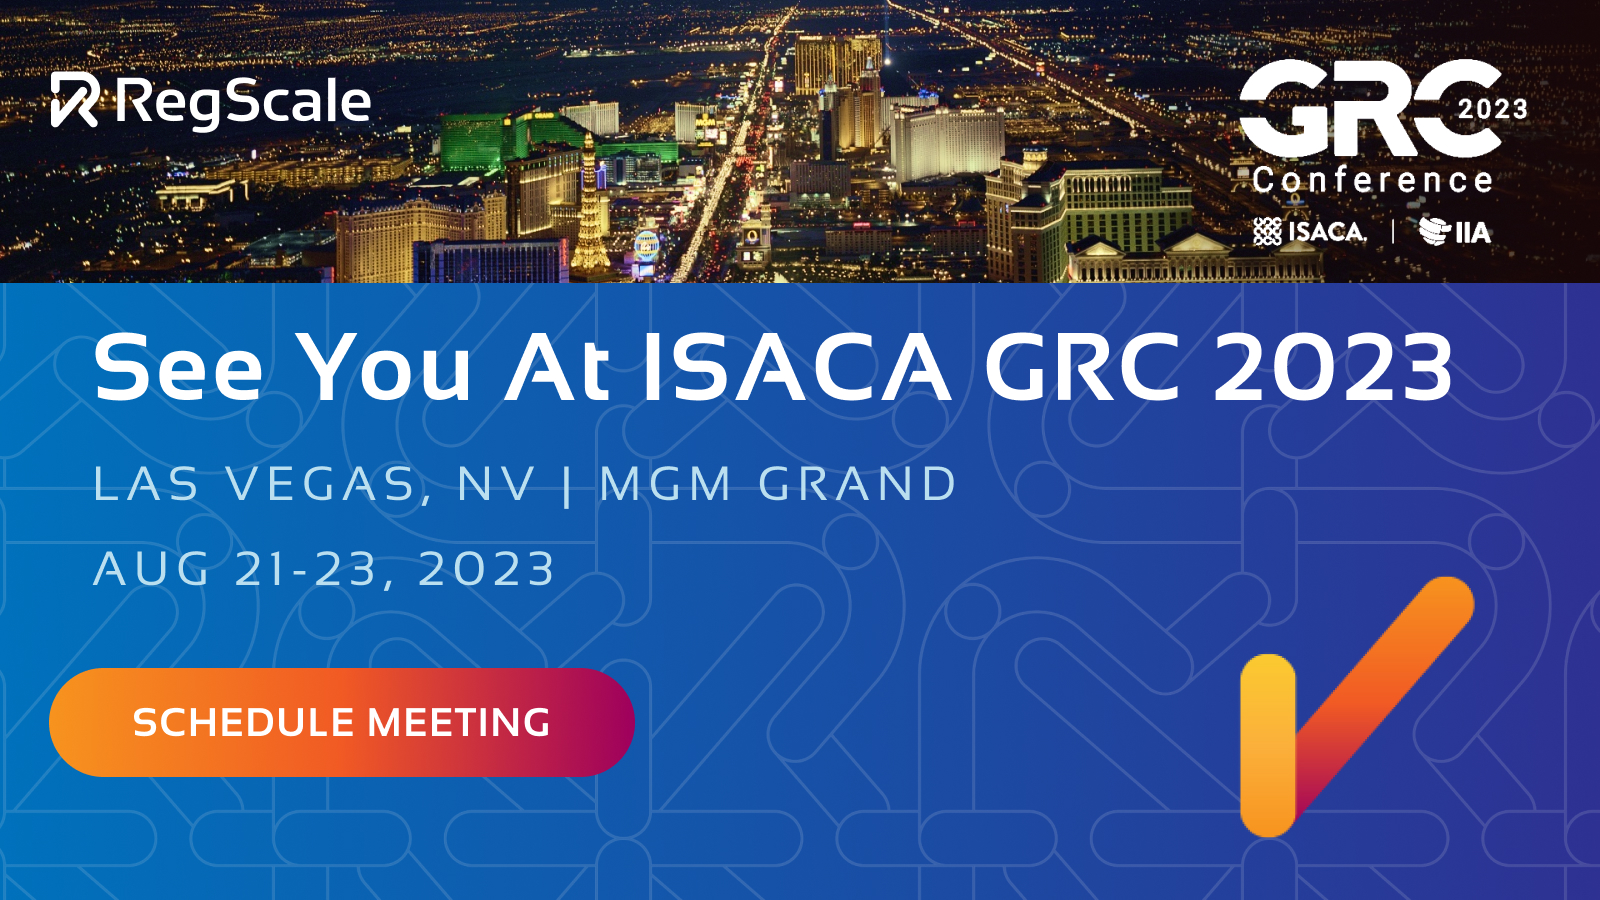 RegScale at ISACA GRC 2023 - RegScale